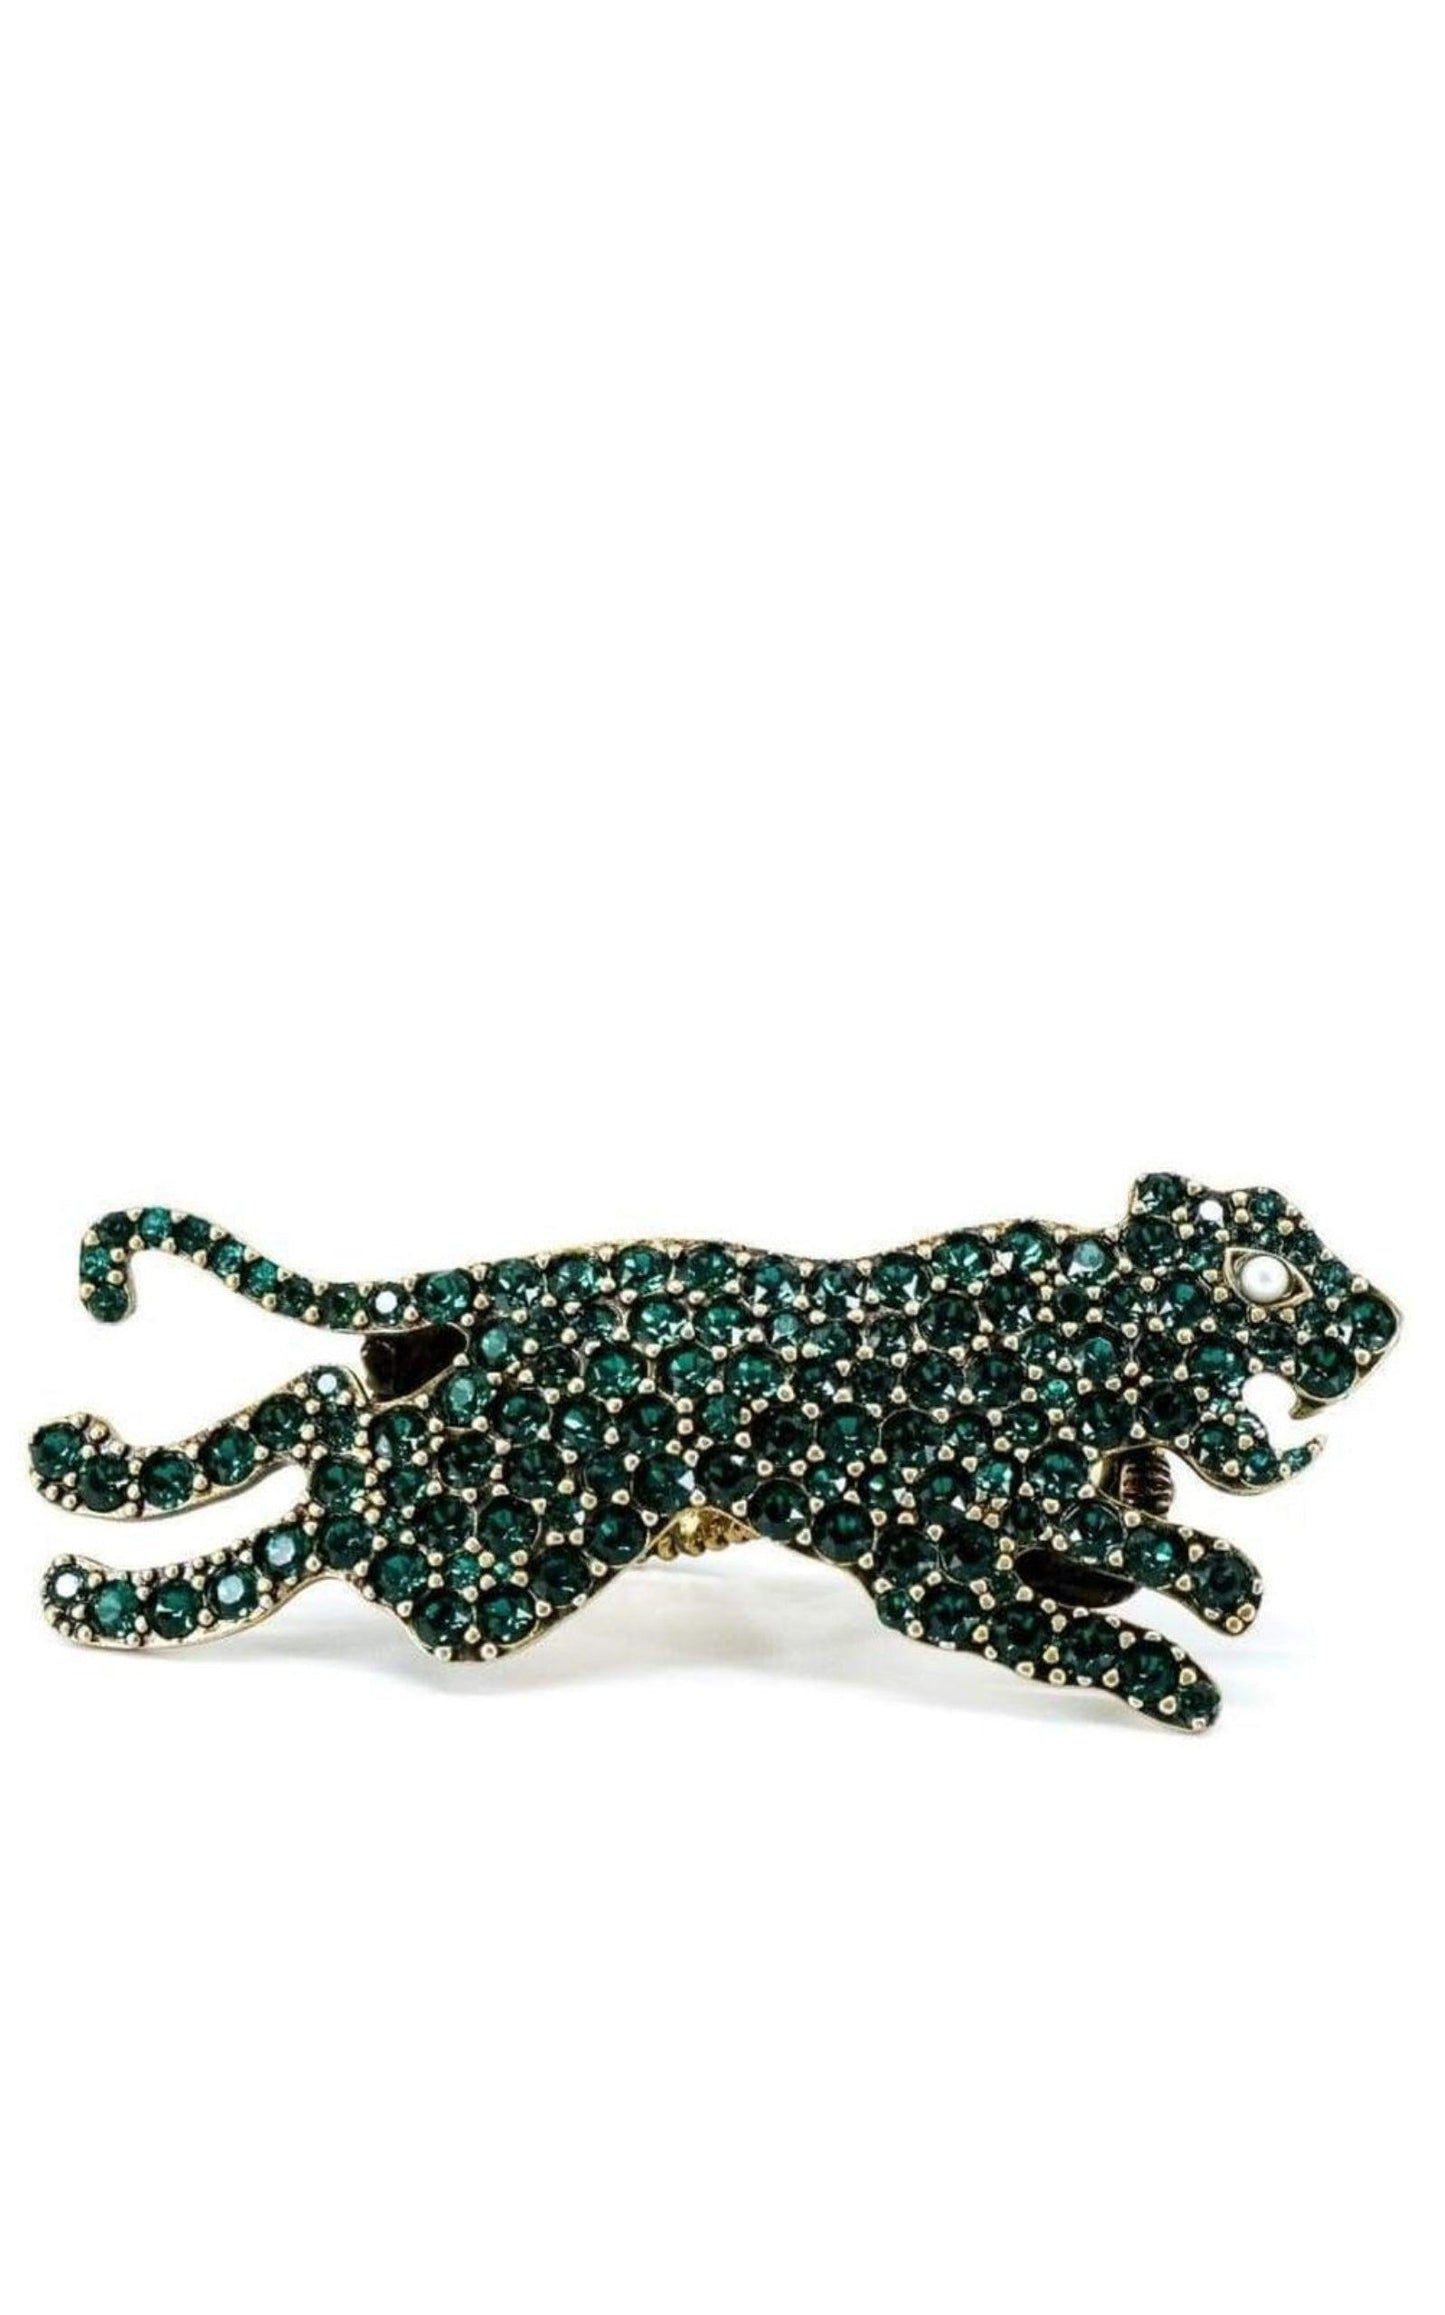  GucciTwo Finger Green Ring - Runway Catalog